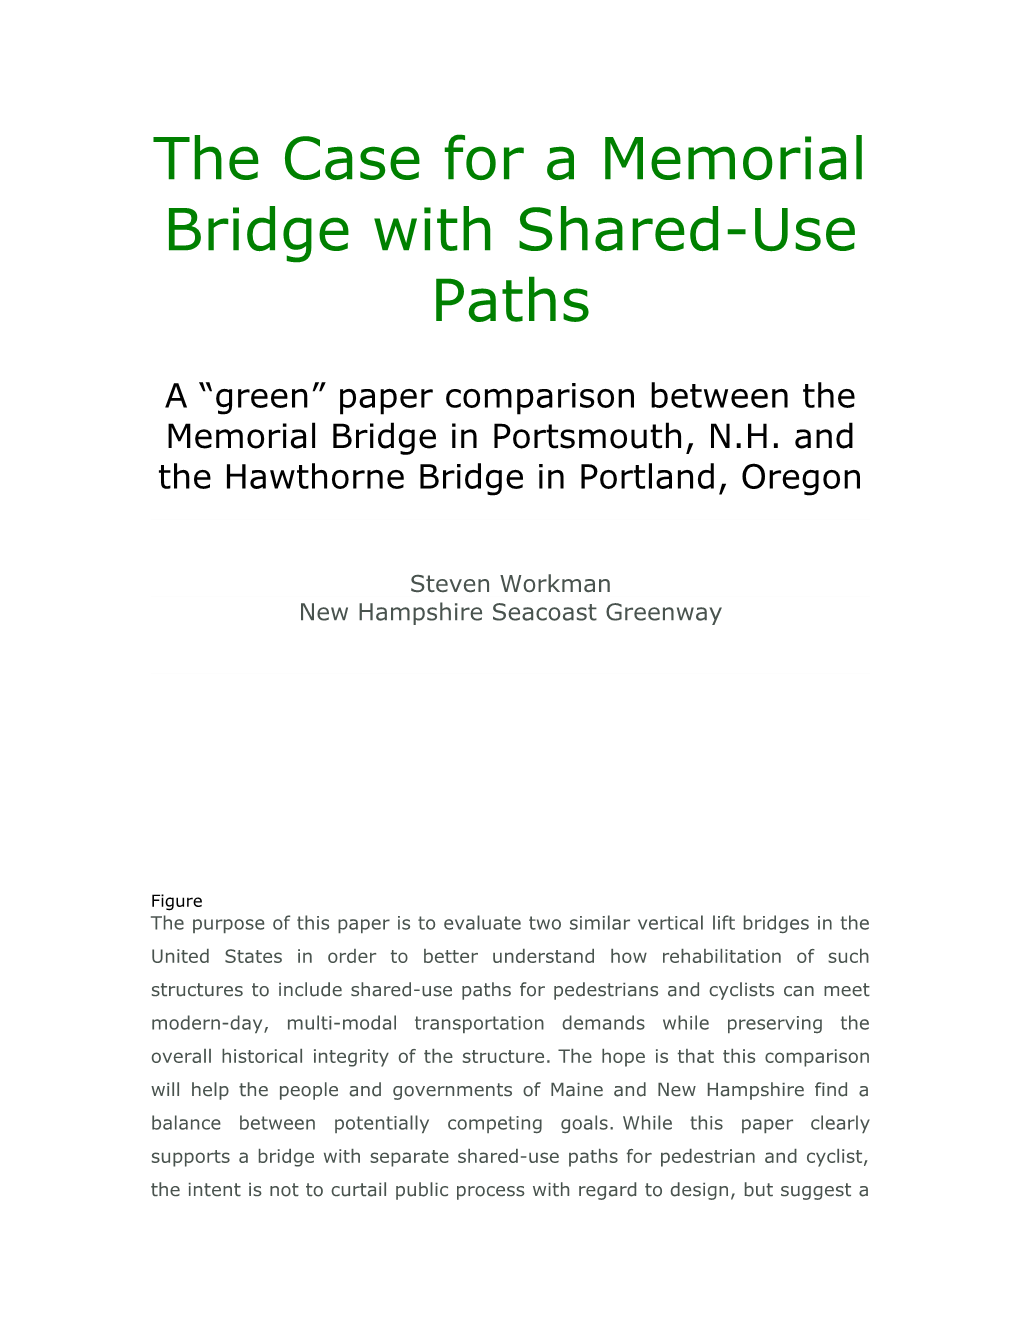 The Case for a Memorial Bridge with Shared-Use Paths